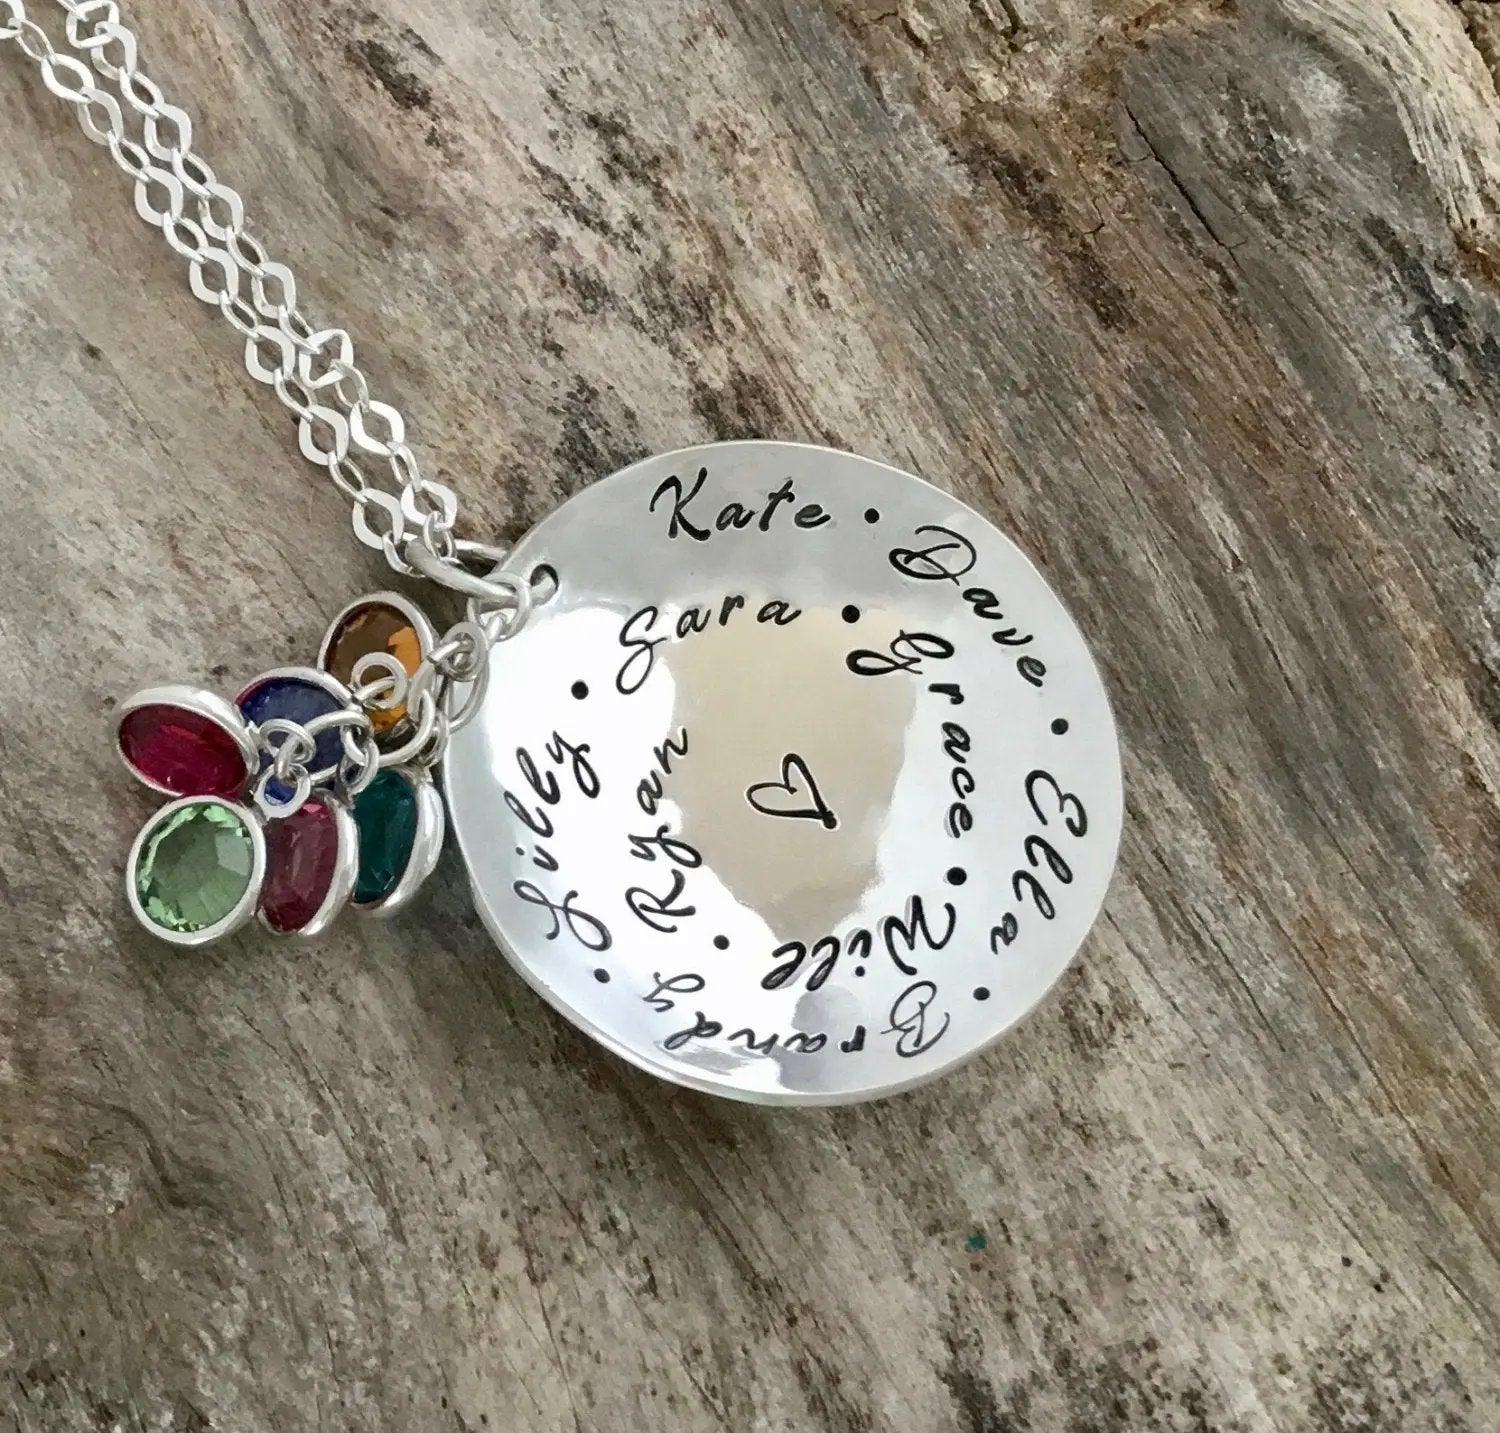 Kit Heath Personalised Sterling Silver Pebble and Tag Birthstone Pendant  Necklace, Peridot/August at John Lewis & Partners